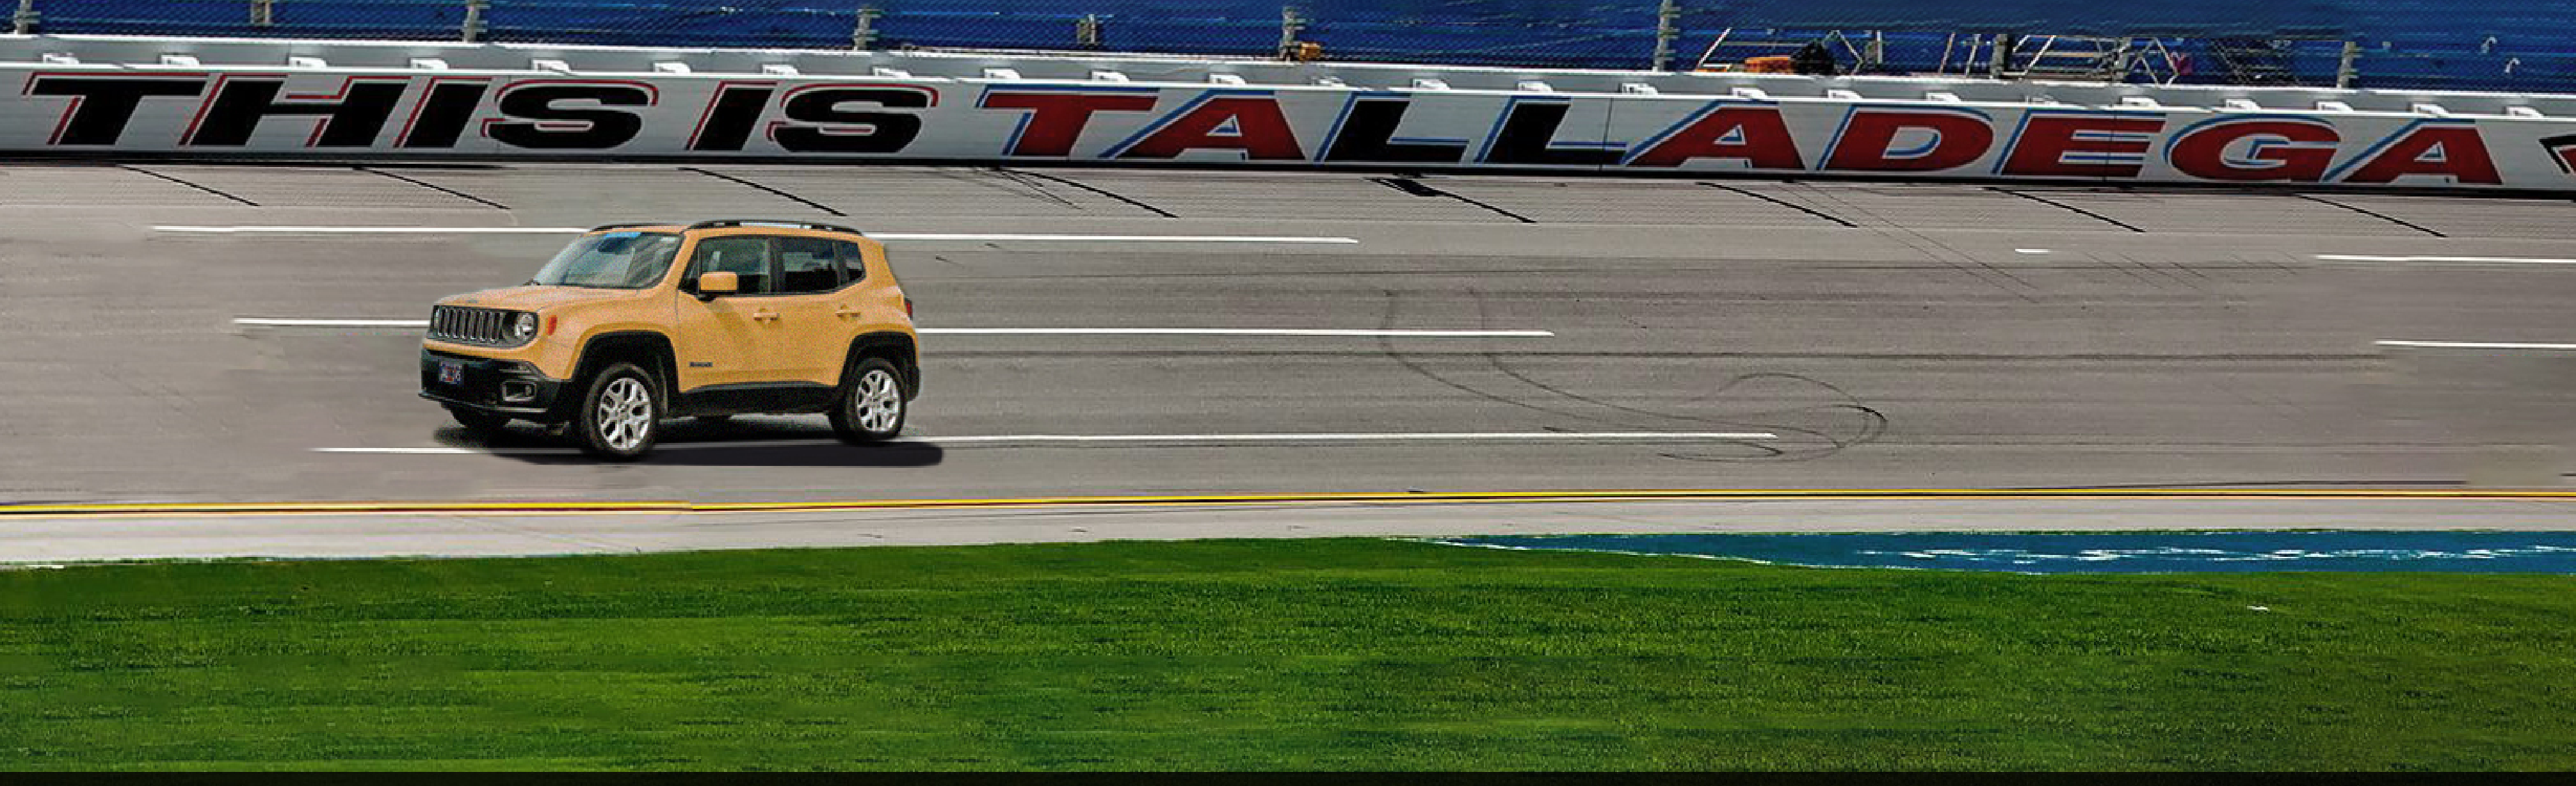 Yellow car driving around the Talladega Superspeedway with “This is Talladega” on a white banner behind it.